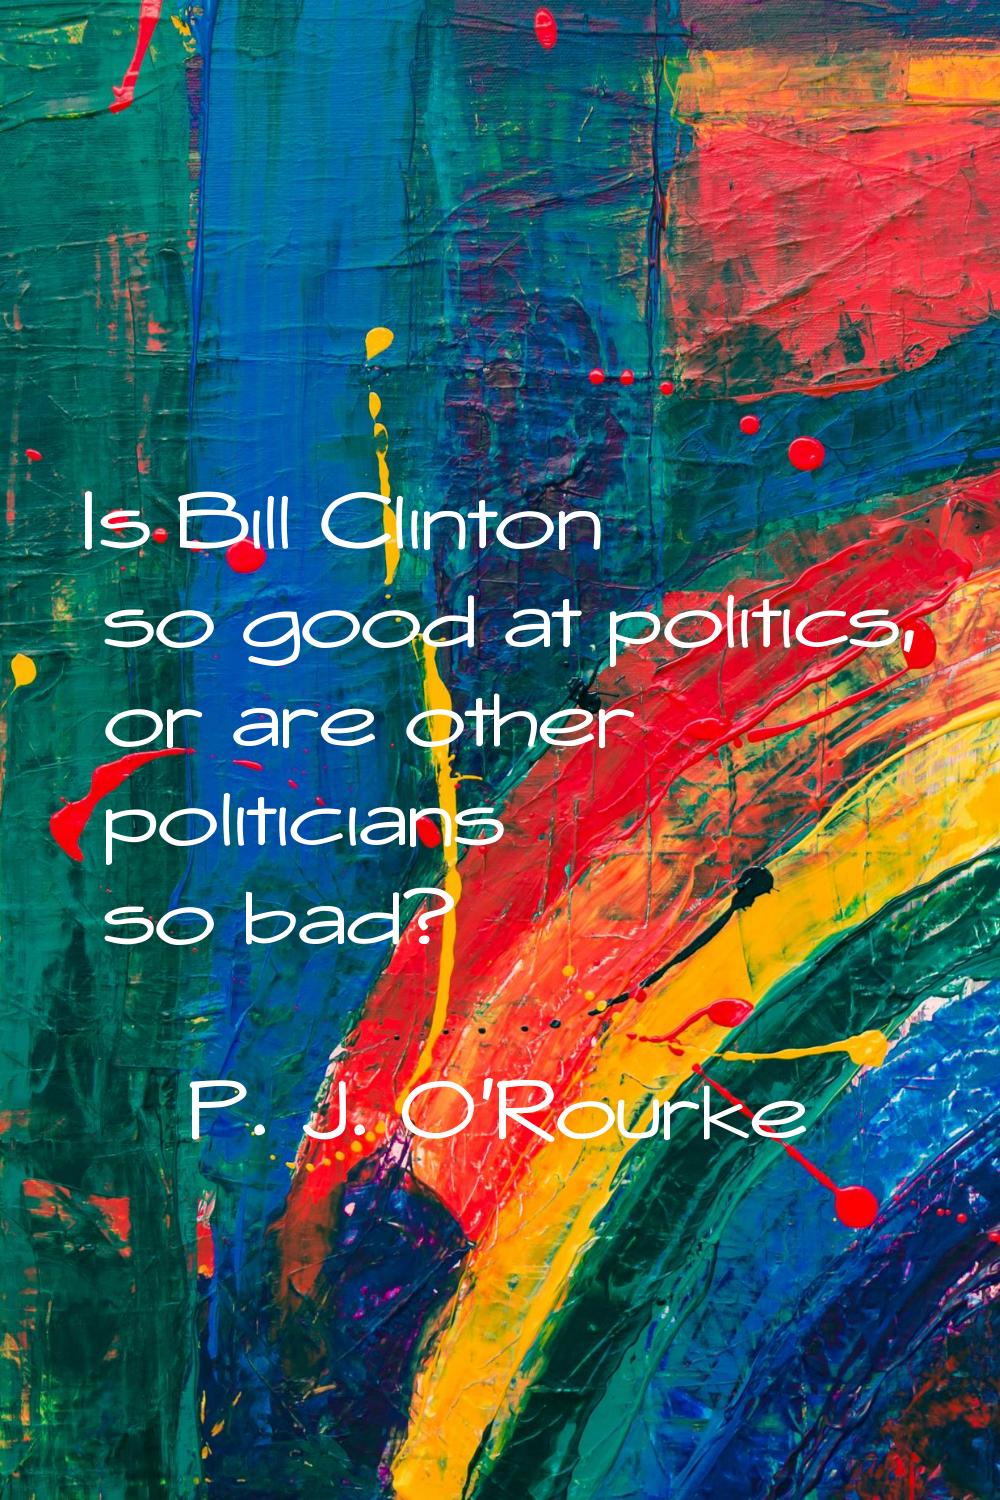 Is Bill Clinton so good at politics, or are other politicians so bad?